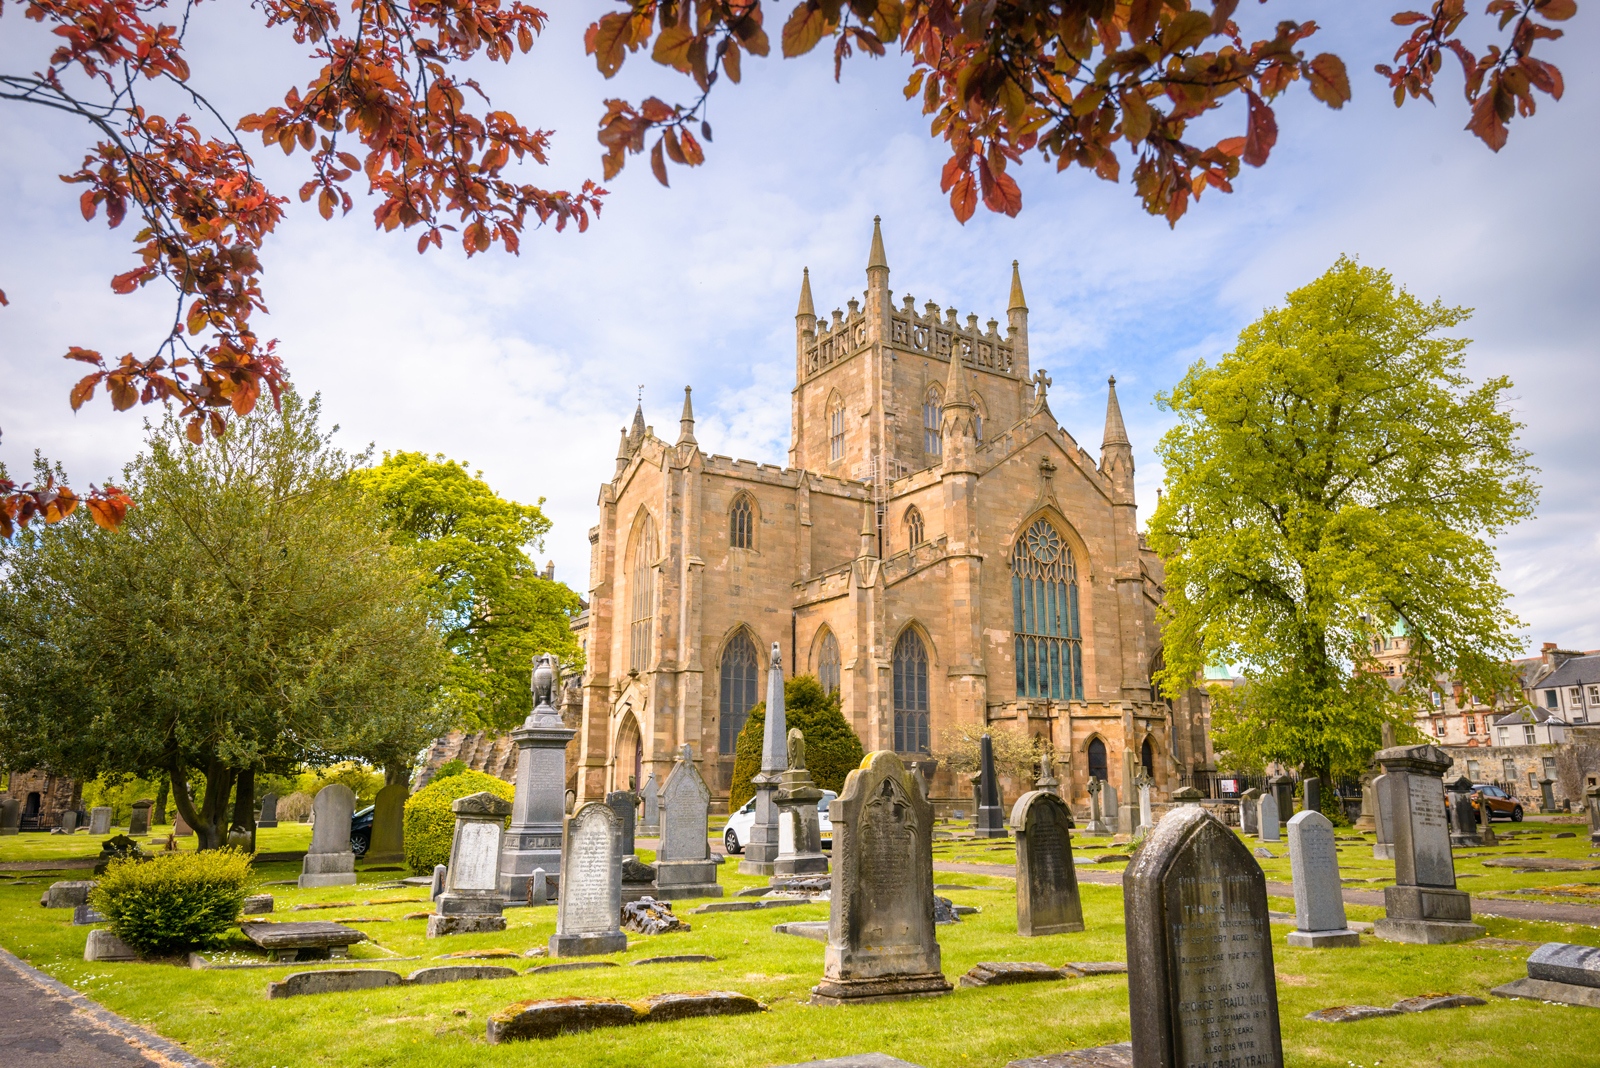 A picture of Dunfermline Abbey, pictured from the graveyard, surrounded by trees